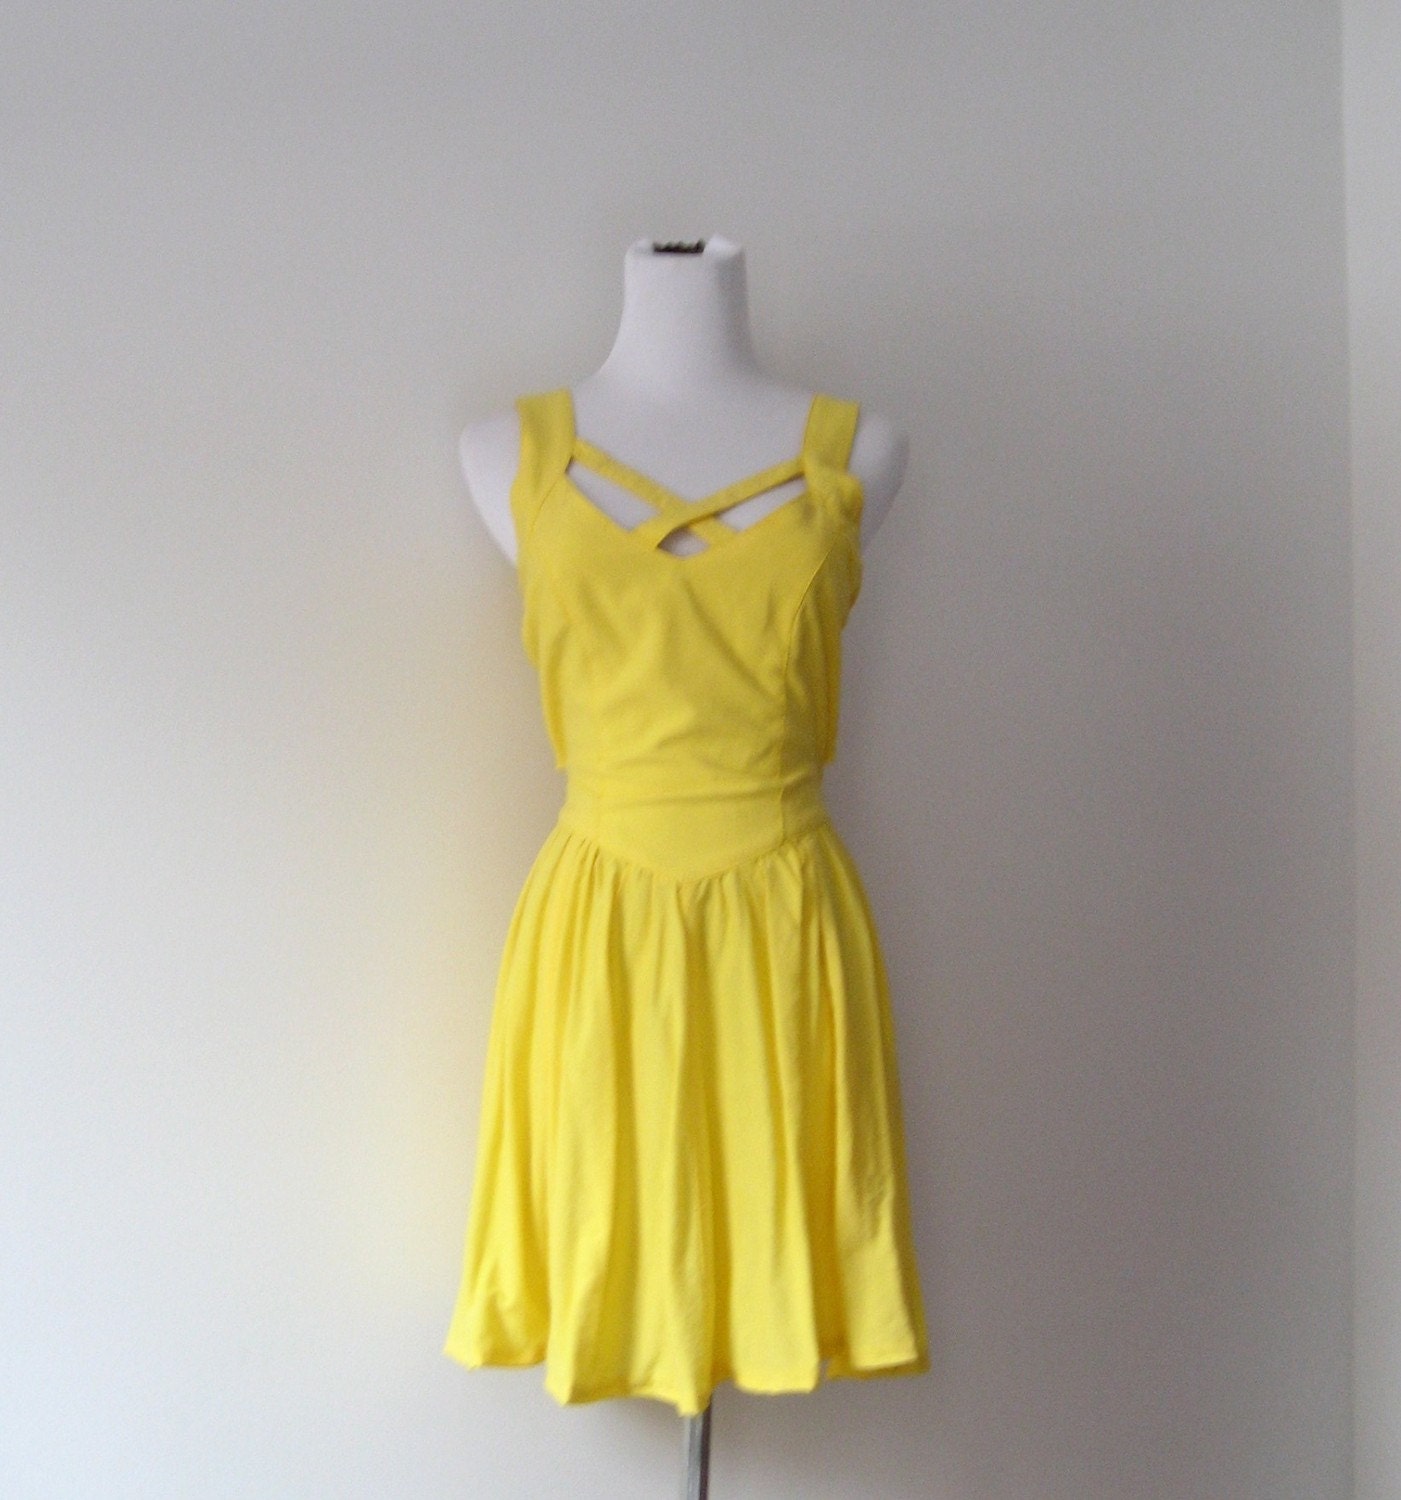 Yellow Sundress with Open Tie Back and Crisscross Front